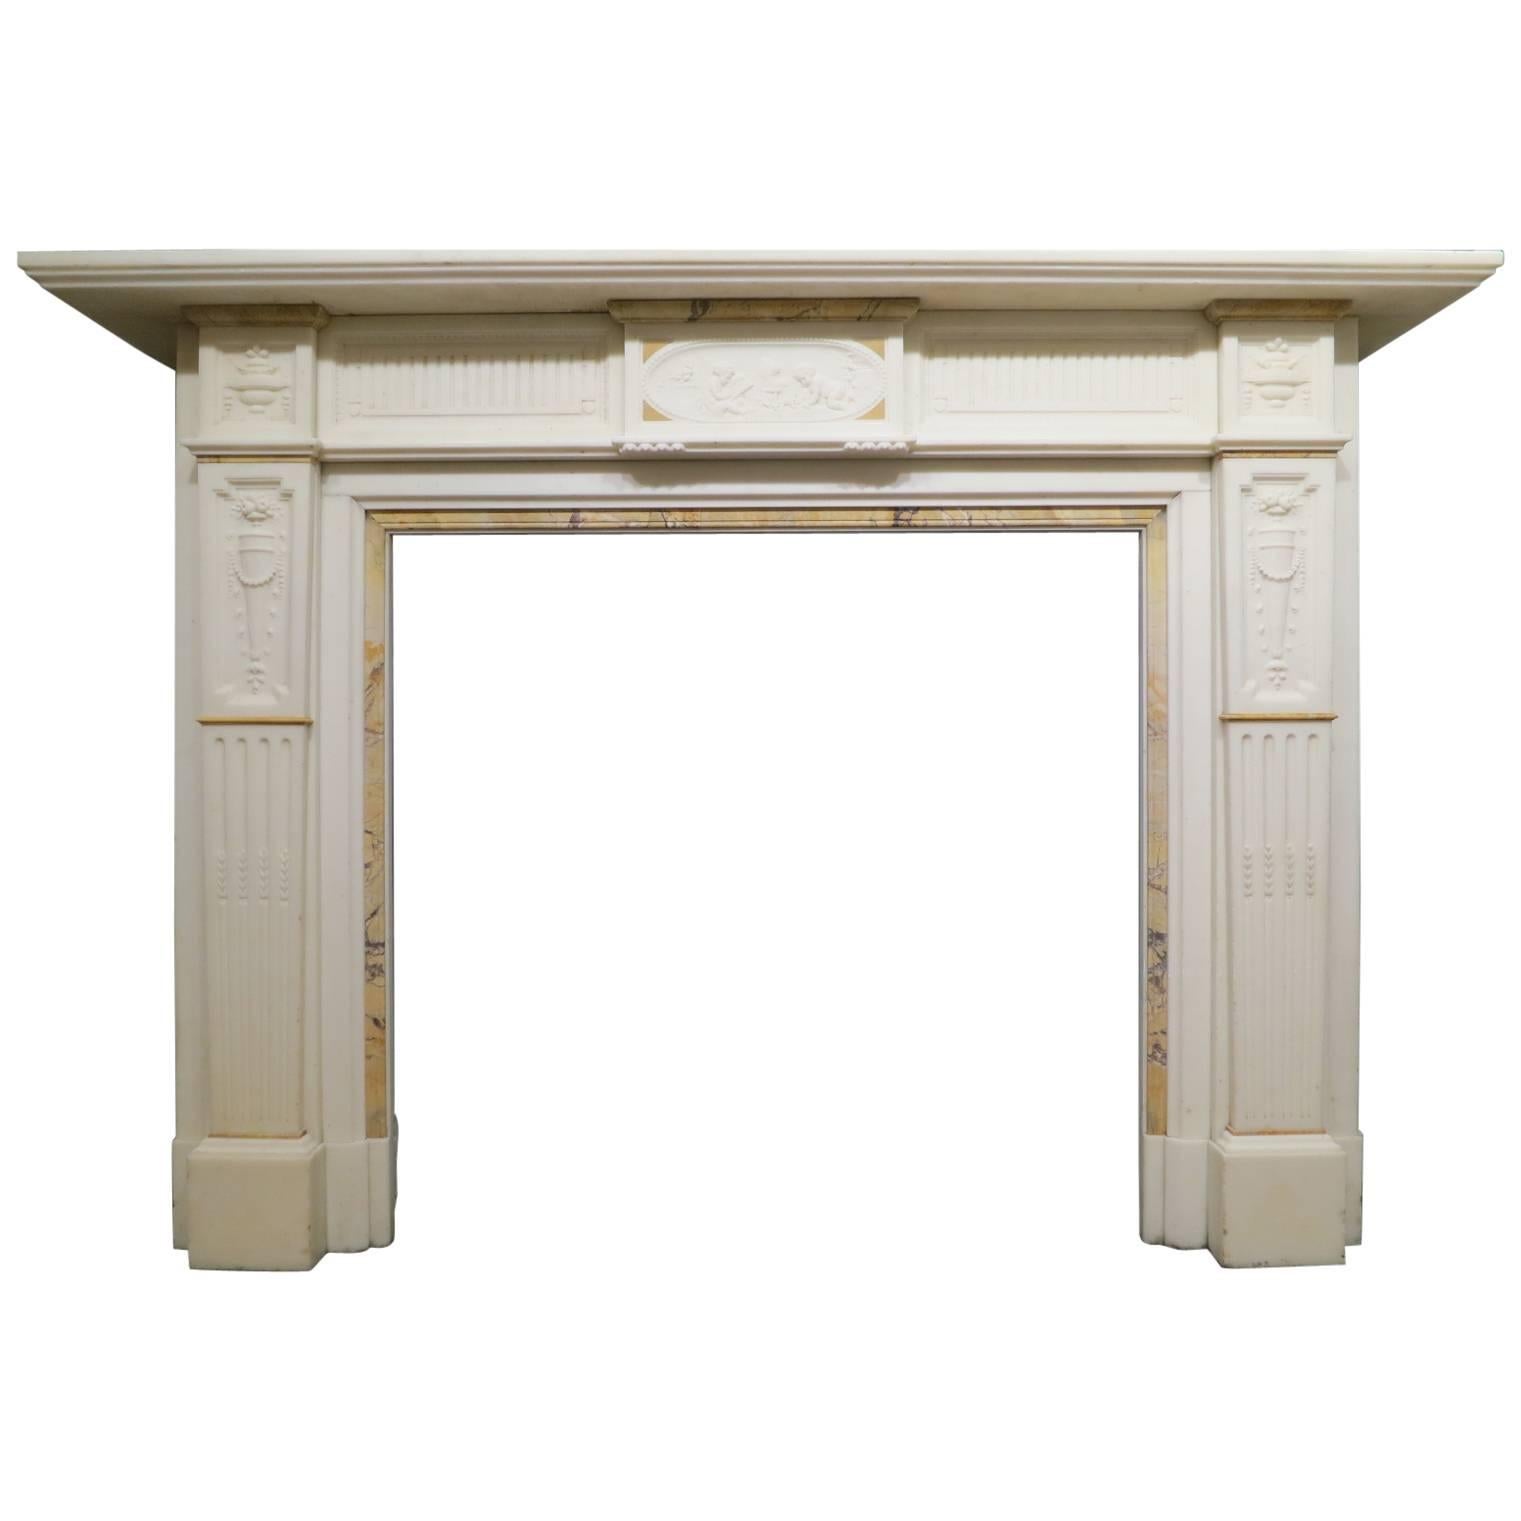 Antique English Fireplace Mantel in Statuary White Marble For Sale